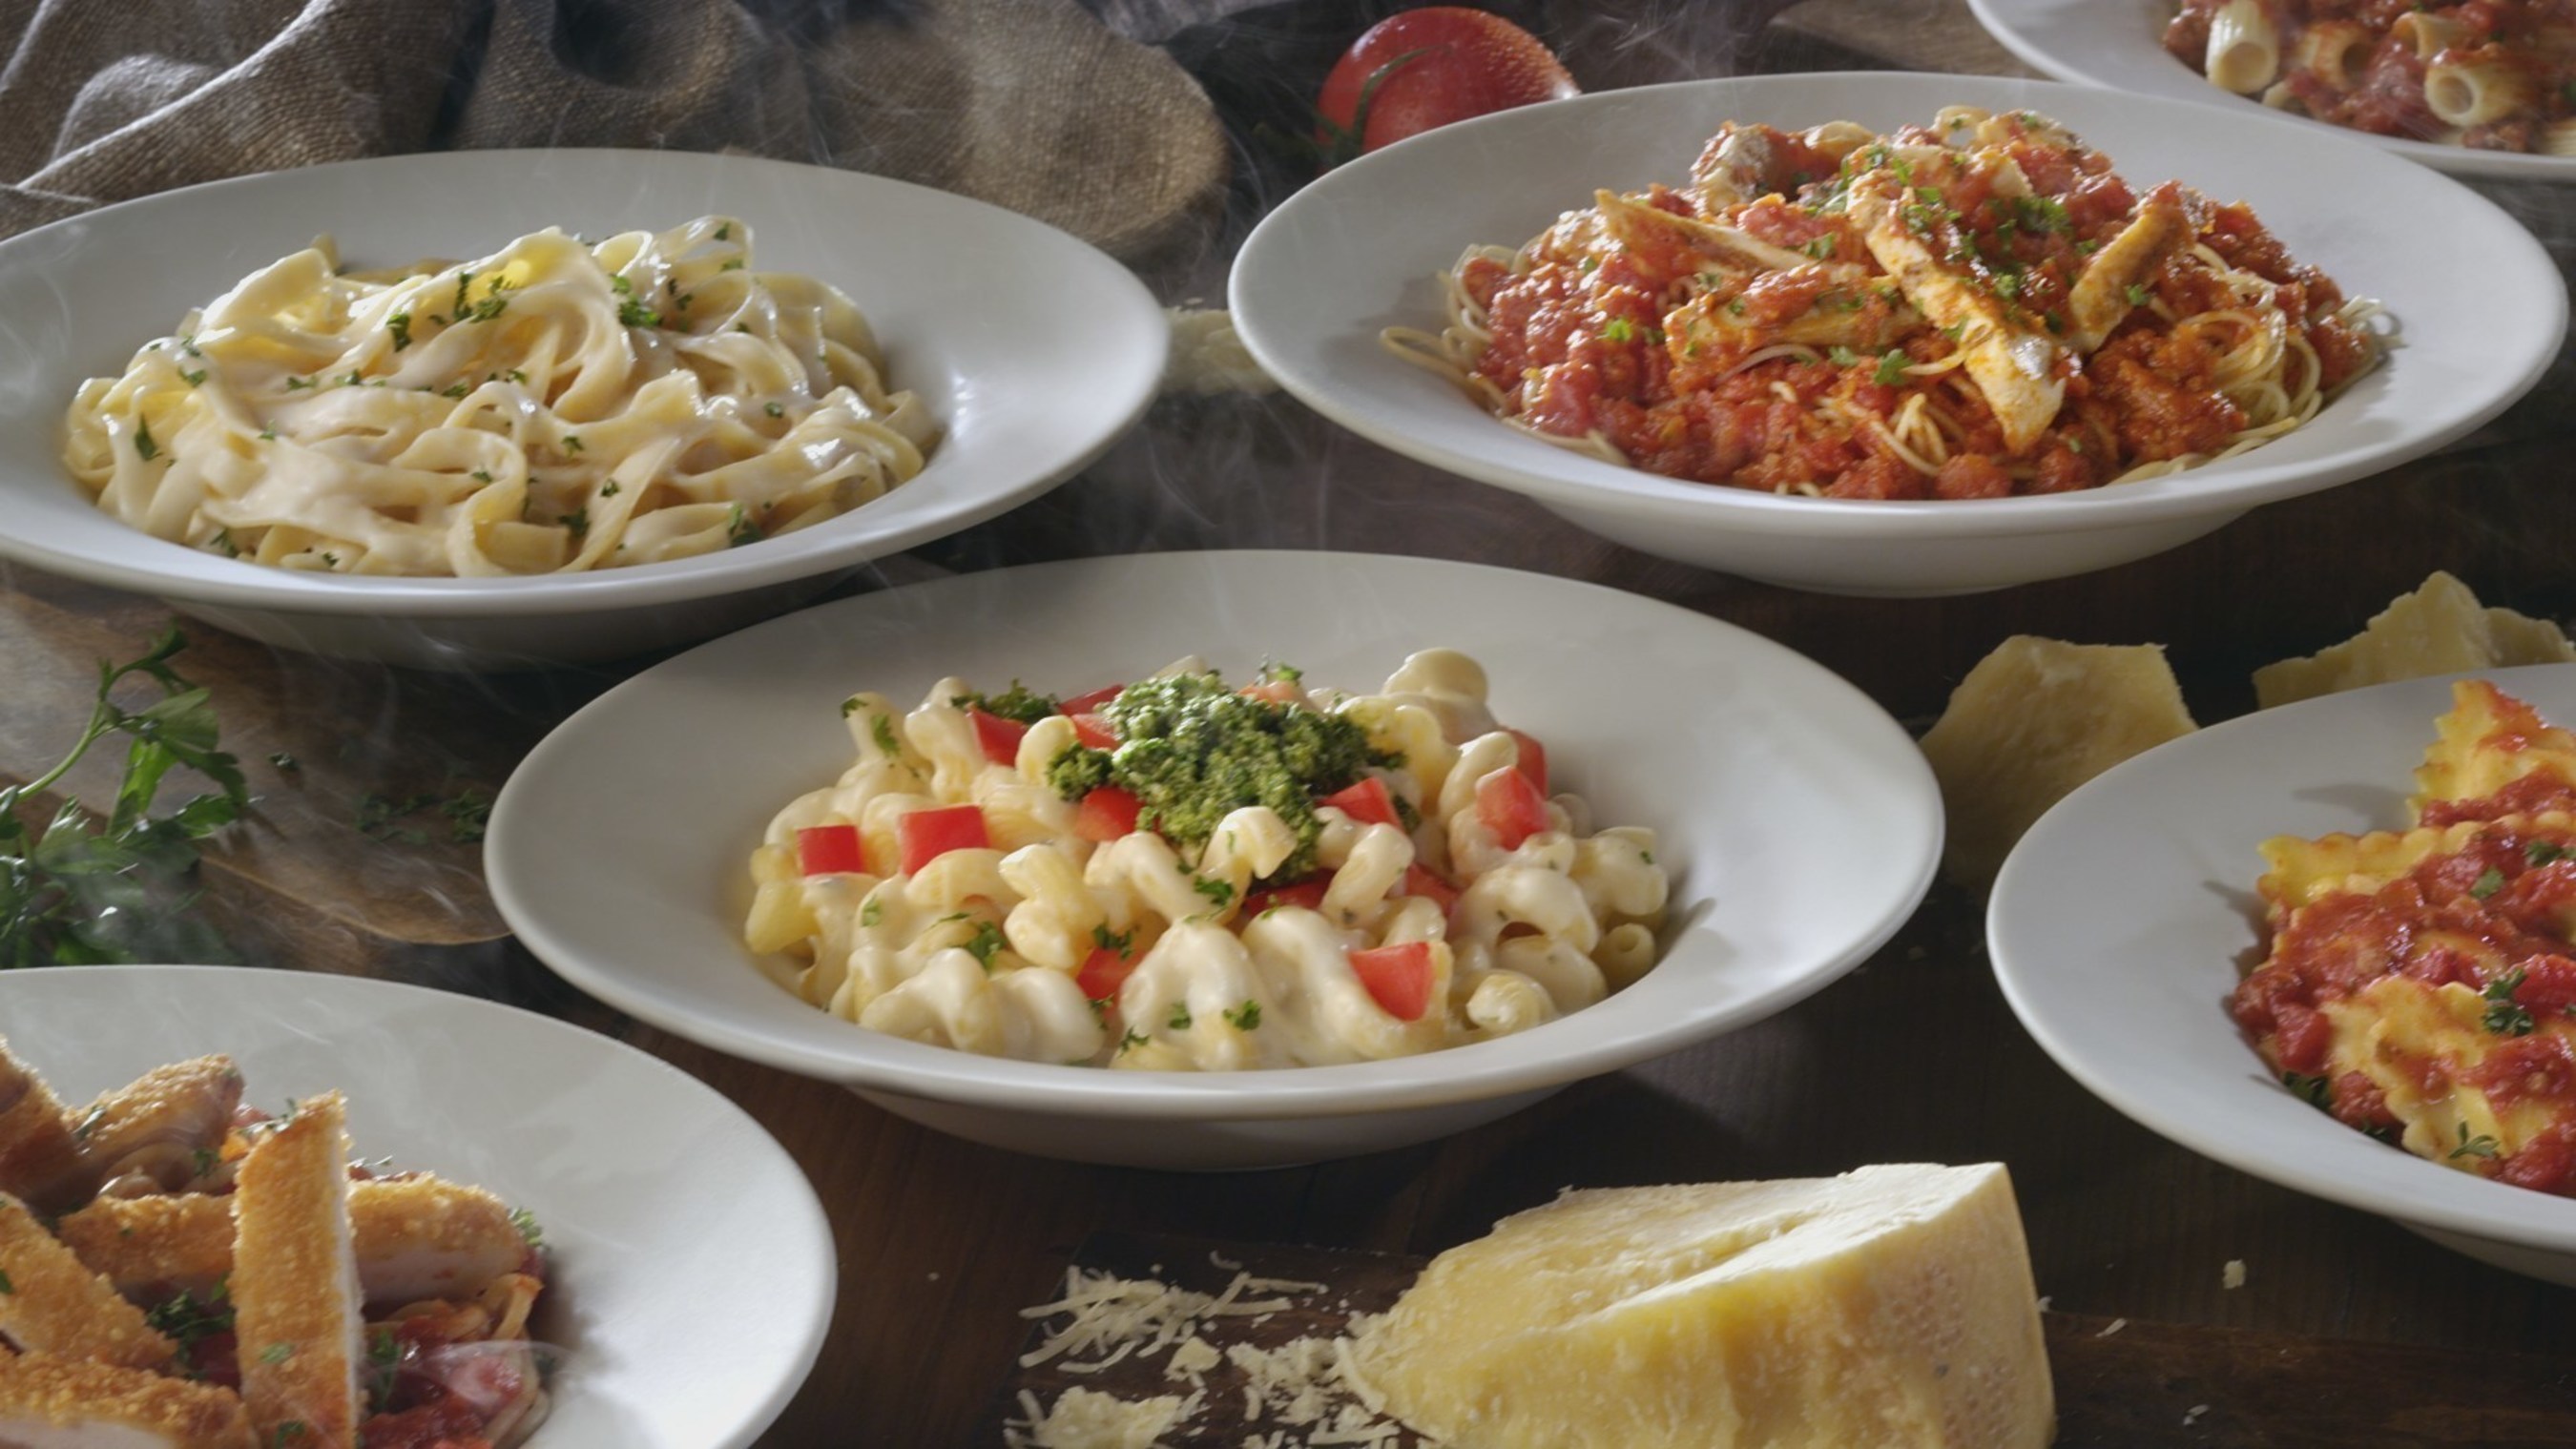 Olive Garden Introduces Never Ending 'Family' Time With New Pasta Pass